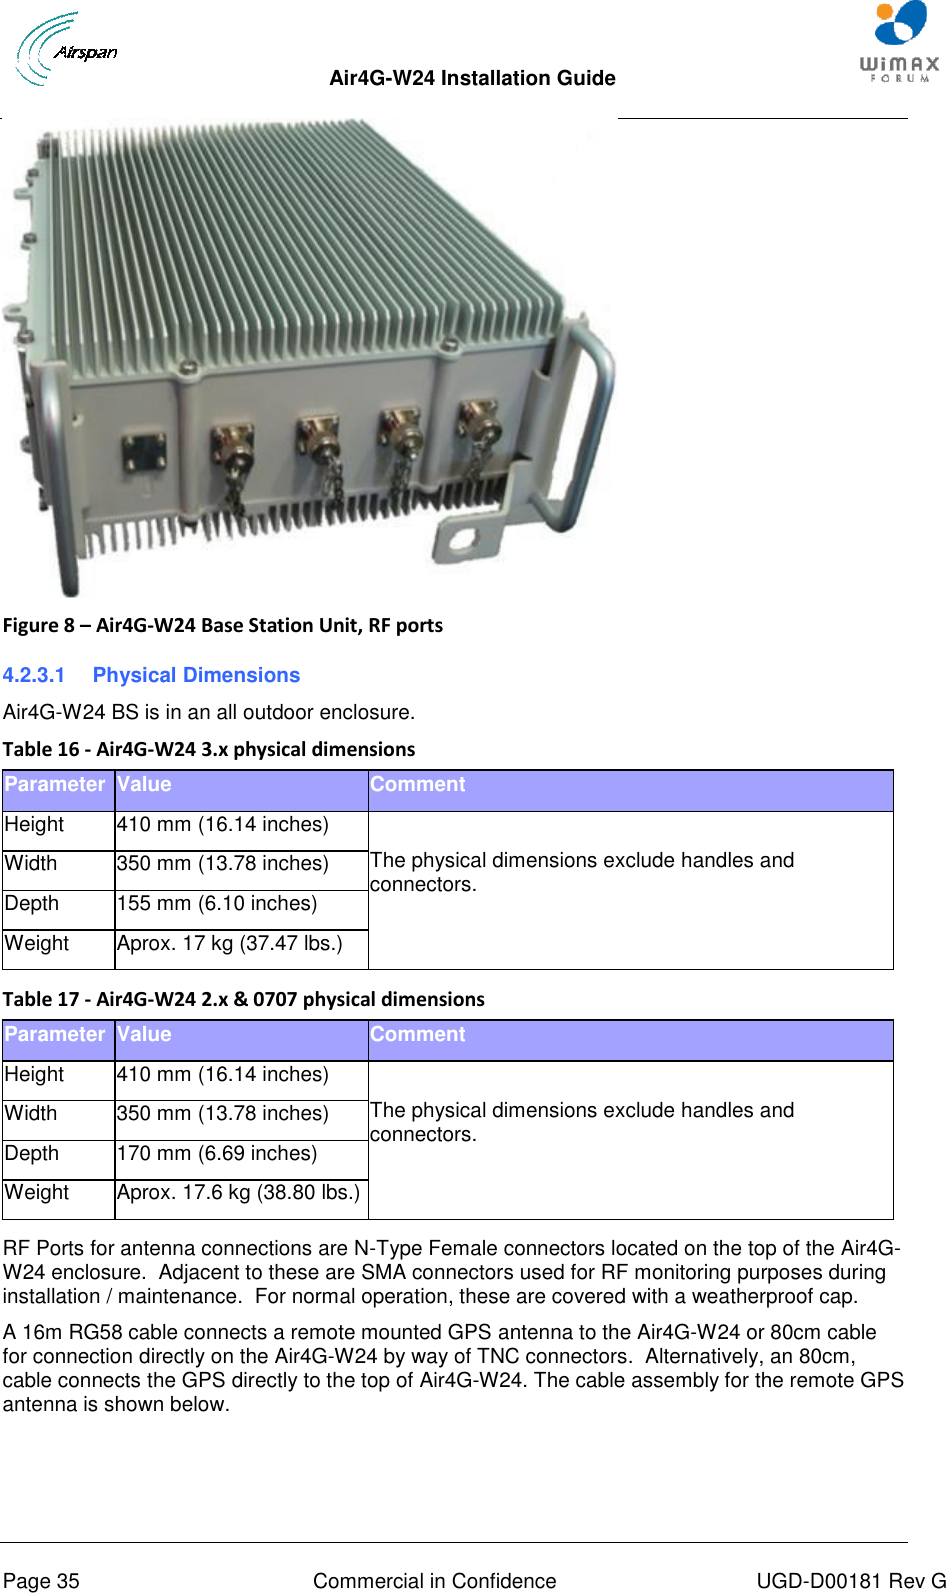  Air4G-W24 Installation Guide       Page 35  Commercial in Confidence  UGD-D00181 Rev G  Figure 8 – Air4G-W24 Base Station Unit, RF ports 4.2.3.1  Physical Dimensions Air4G-W24 BS is in an all outdoor enclosure. Table 16 - Air4G-W24 3.x physical dimensions Parameter Value Comment Height 410 mm (16.14 inches)  The physical dimensions exclude handles and connectors. Width 350 mm (13.78 inches) Depth 155 mm (6.10 inches) Weight Aprox. 17 kg (37.47 lbs.)  Table 17 - Air4G-W24 2.x &amp; 0707 physical dimensions Parameter Value Comment Height 410 mm (16.14 inches)  The physical dimensions exclude handles and connectors. Width 350 mm (13.78 inches) Depth 170 mm (6.69 inches) Weight Aprox. 17.6 kg (38.80 lbs.)  RF Ports for antenna connections are N-Type Female connectors located on the top of the Air4G-W24 enclosure.  Adjacent to these are SMA connectors used for RF monitoring purposes during installation / maintenance.  For normal operation, these are covered with a weatherproof cap. A 16m RG58 cable connects a remote mounted GPS antenna to the Air4G-W24 or 80cm cable for connection directly on the Air4G-W24 by way of TNC connectors.  Alternatively, an 80cm, cable connects the GPS directly to the top of Air4G-W24. The cable assembly for the remote GPS antenna is shown below.  